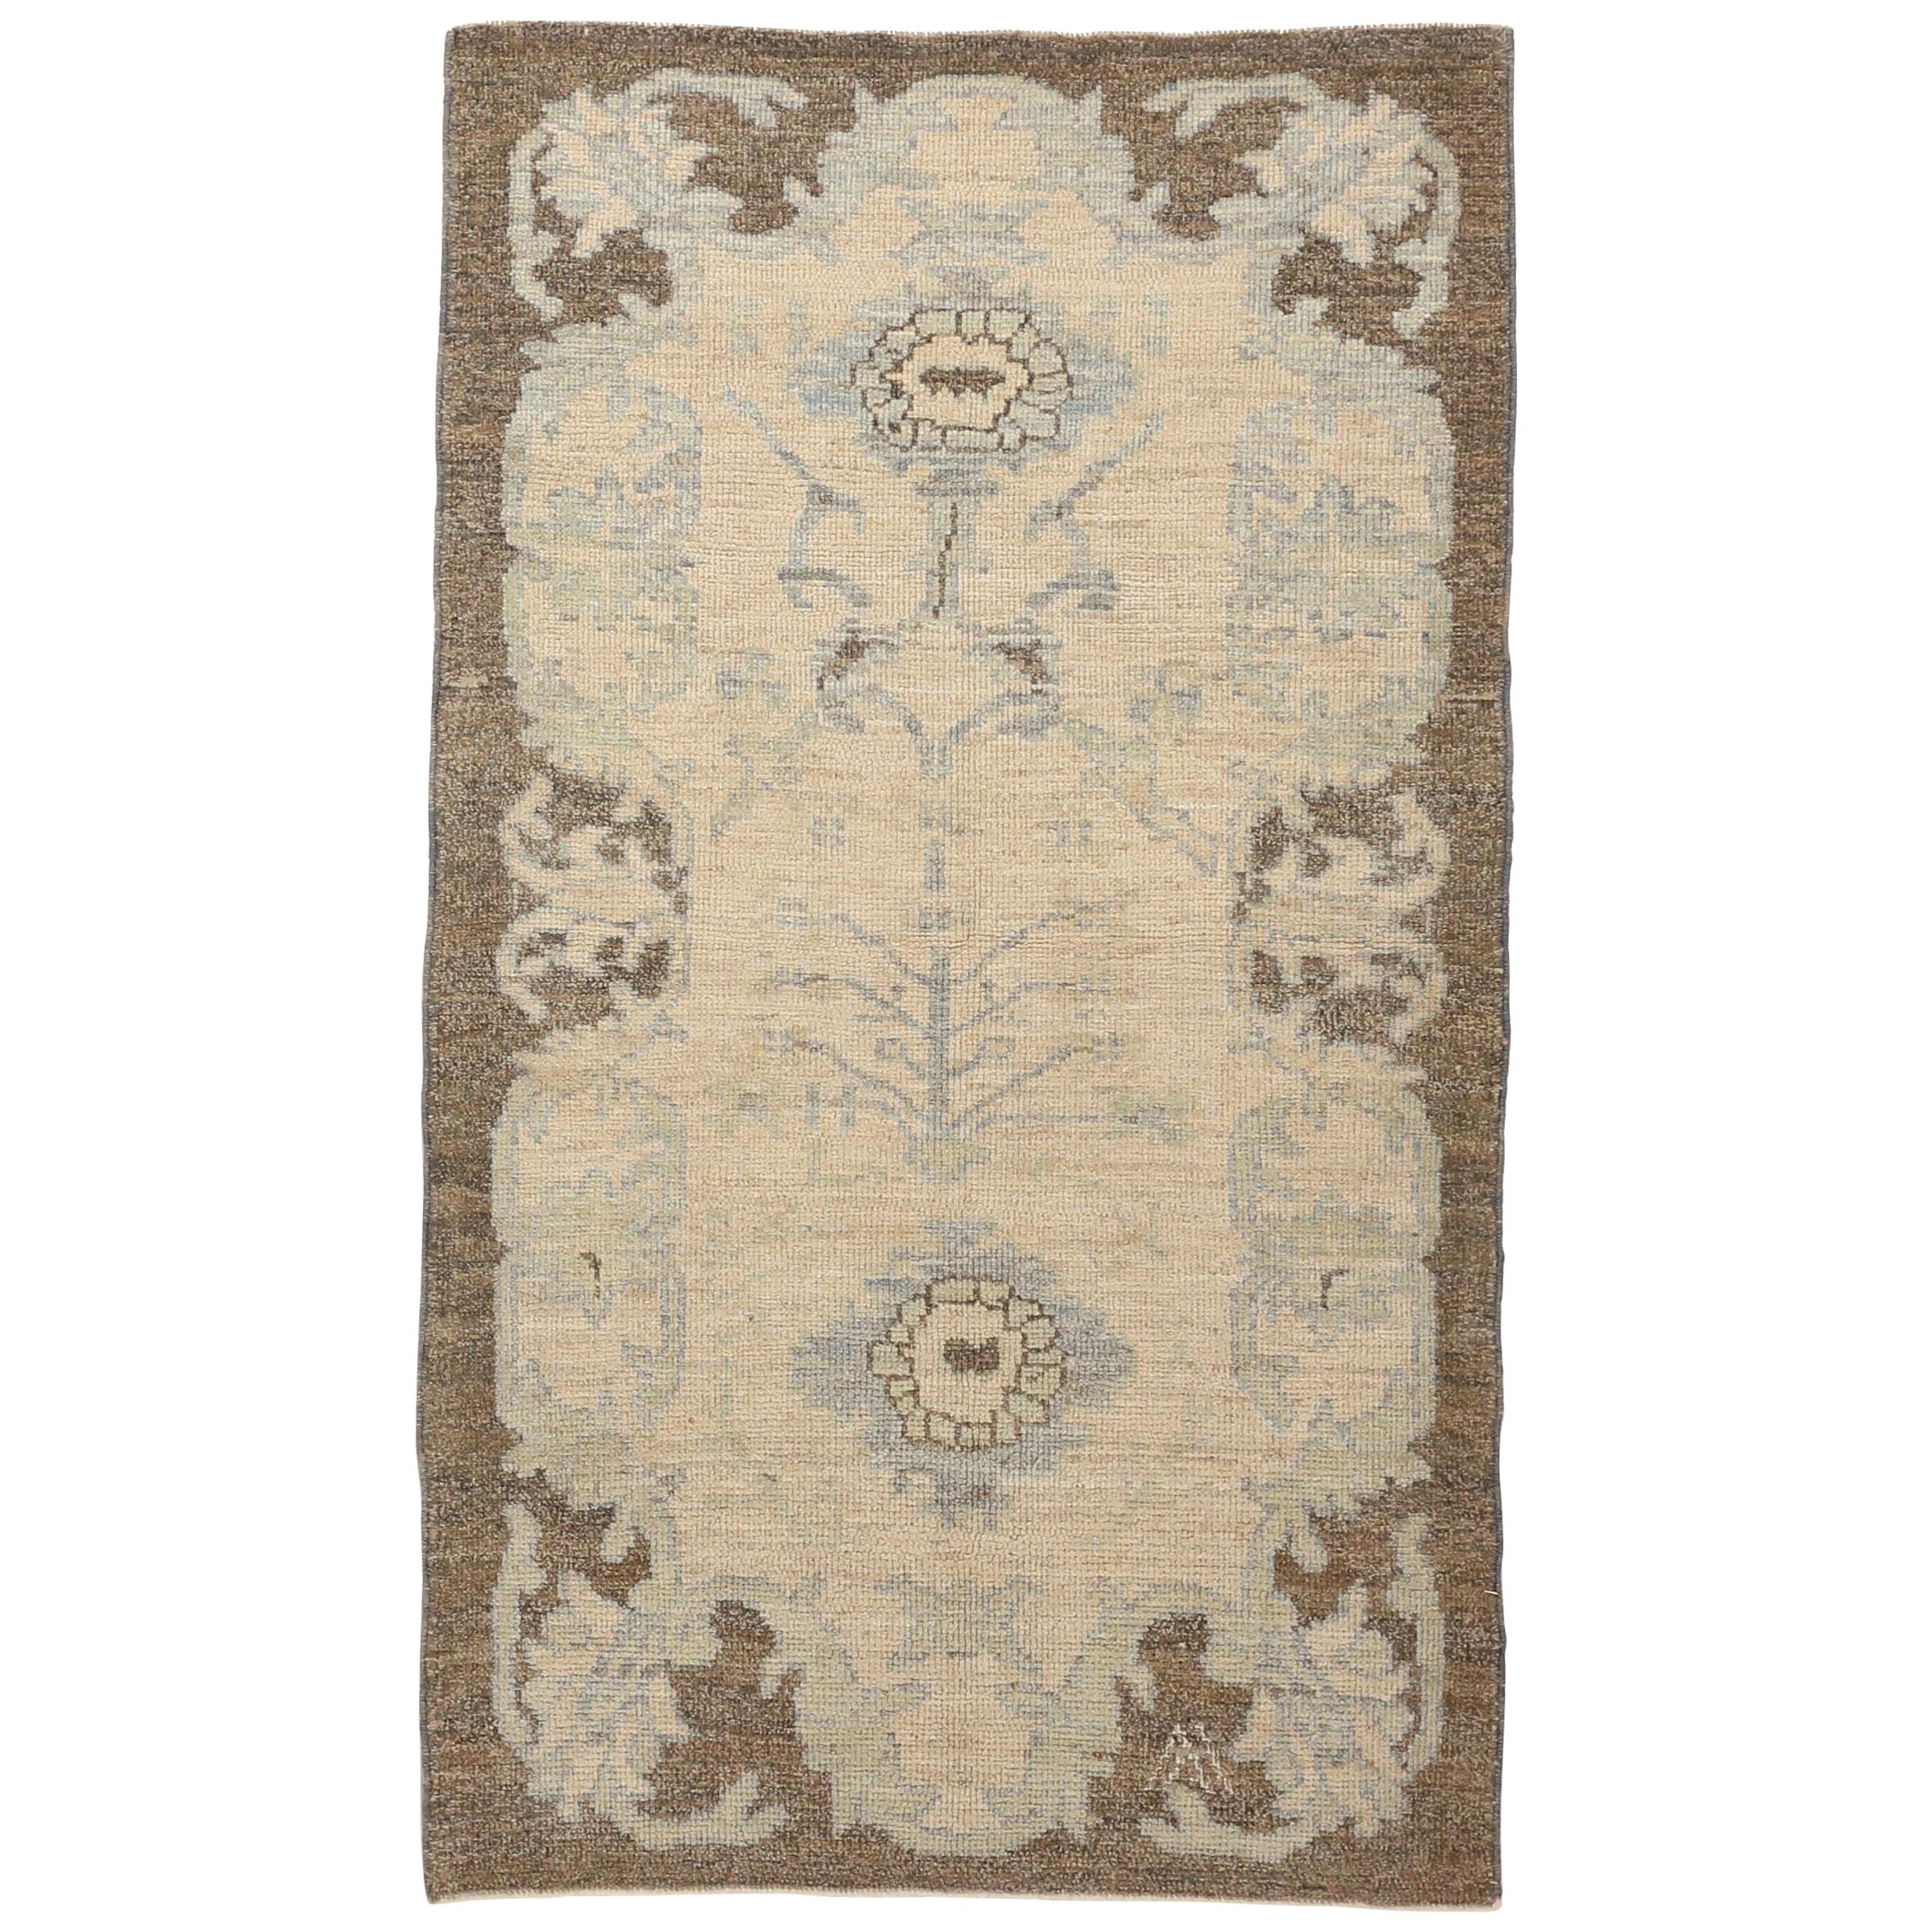 Contemporary Oushak Persian Rug with One-Piece Floral Field in Ivory and Blue